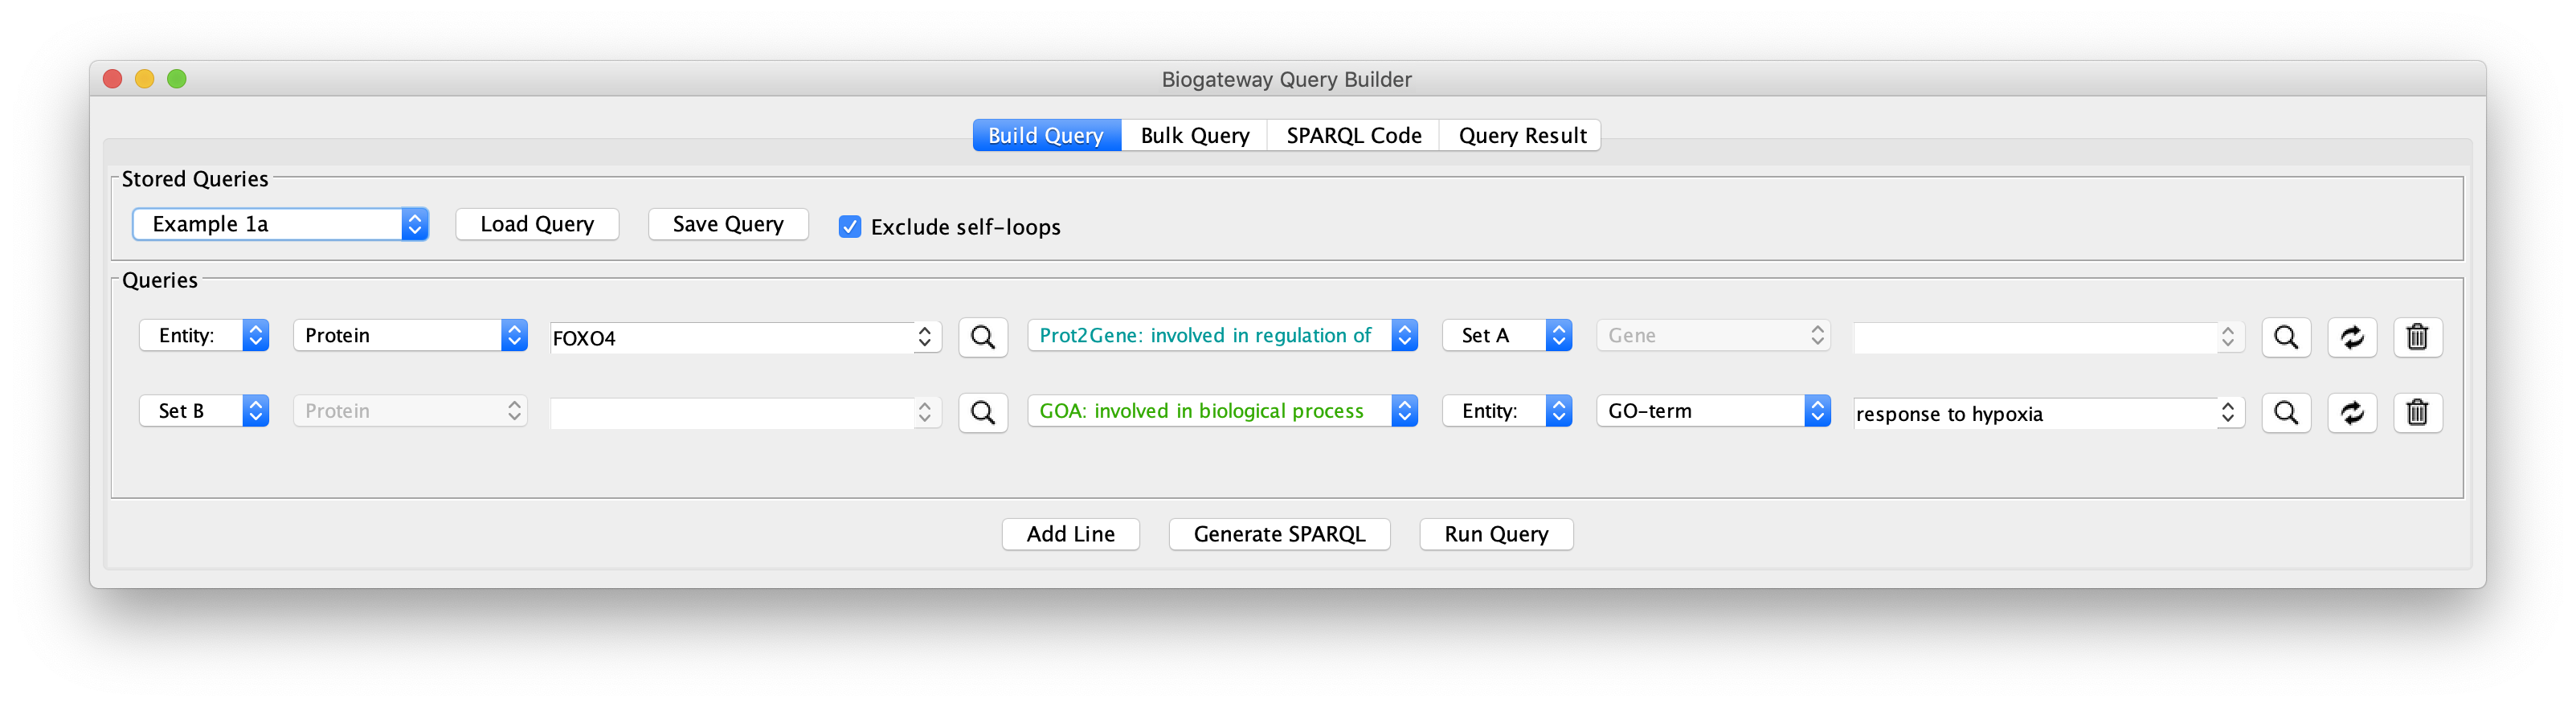 Figure 2: the query builder after loading the Example 1a query